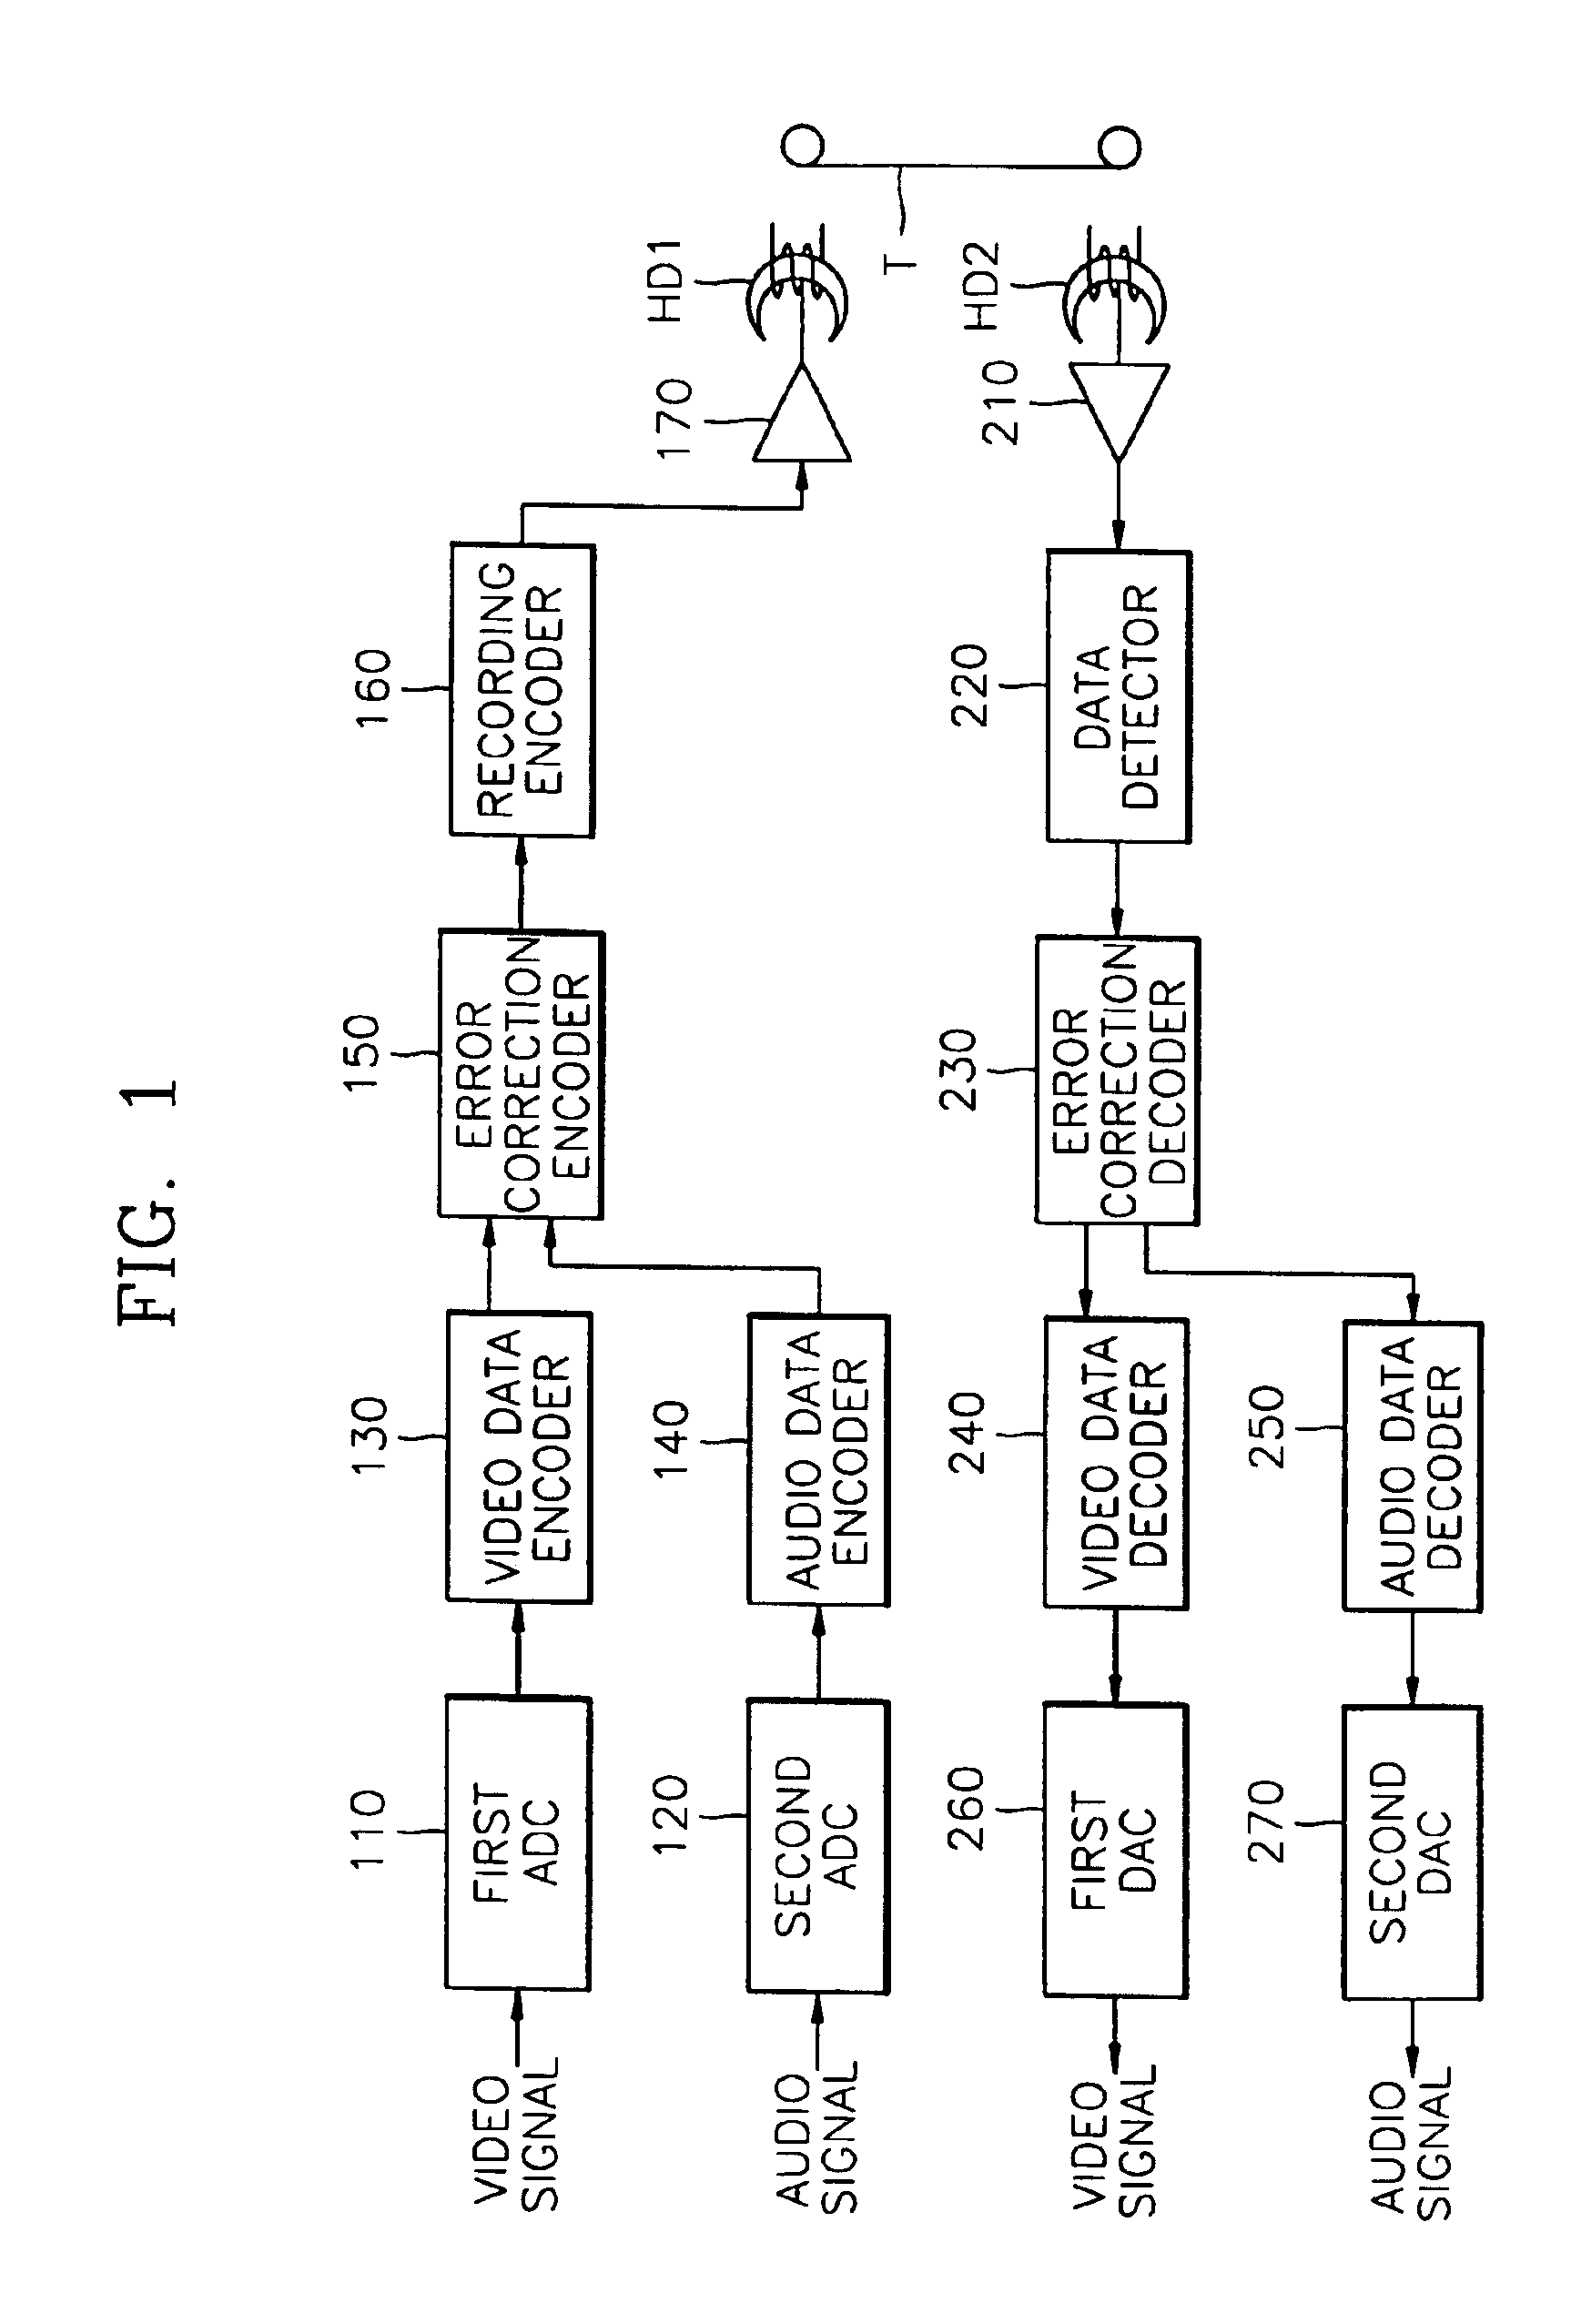 Digital recording and playback apparatus having MPEG CODEC and method therefor